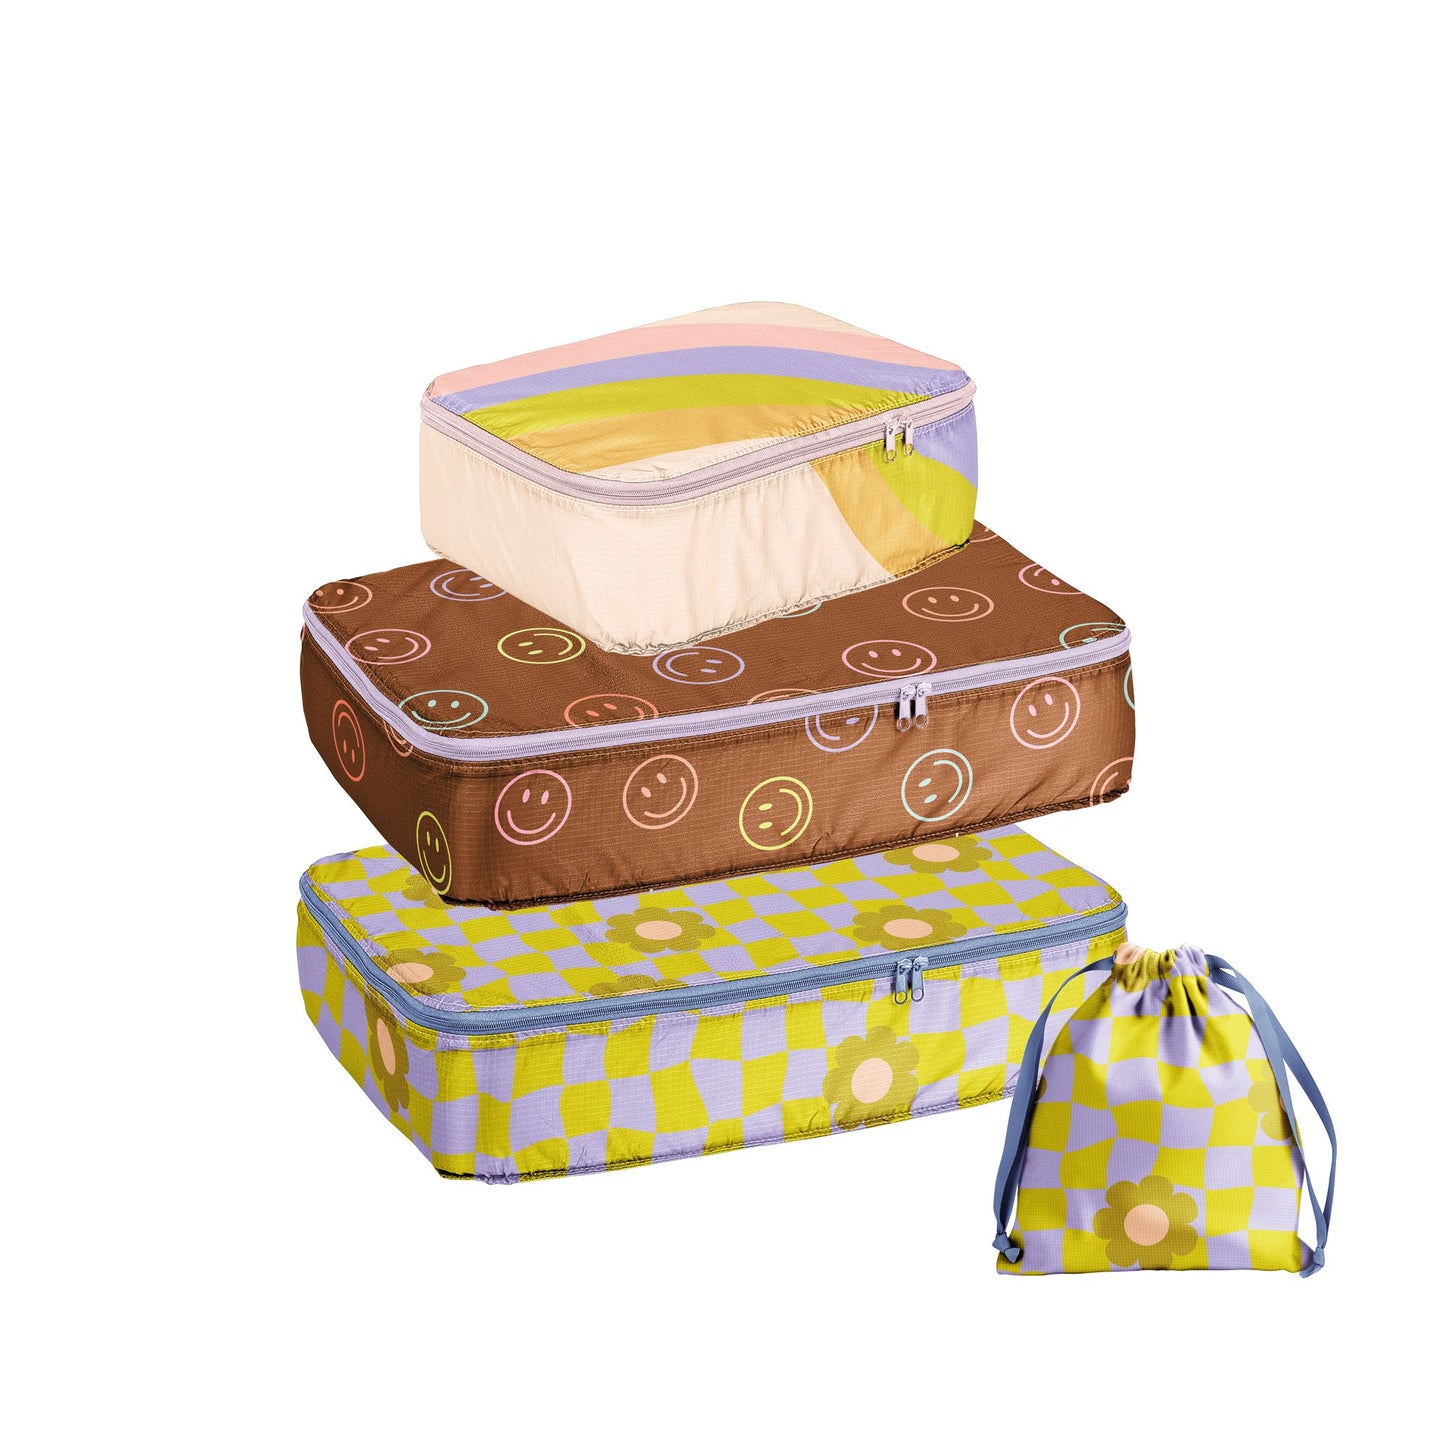 Cool Funky Daisy Packing Cube Set | Travel Organizer Set